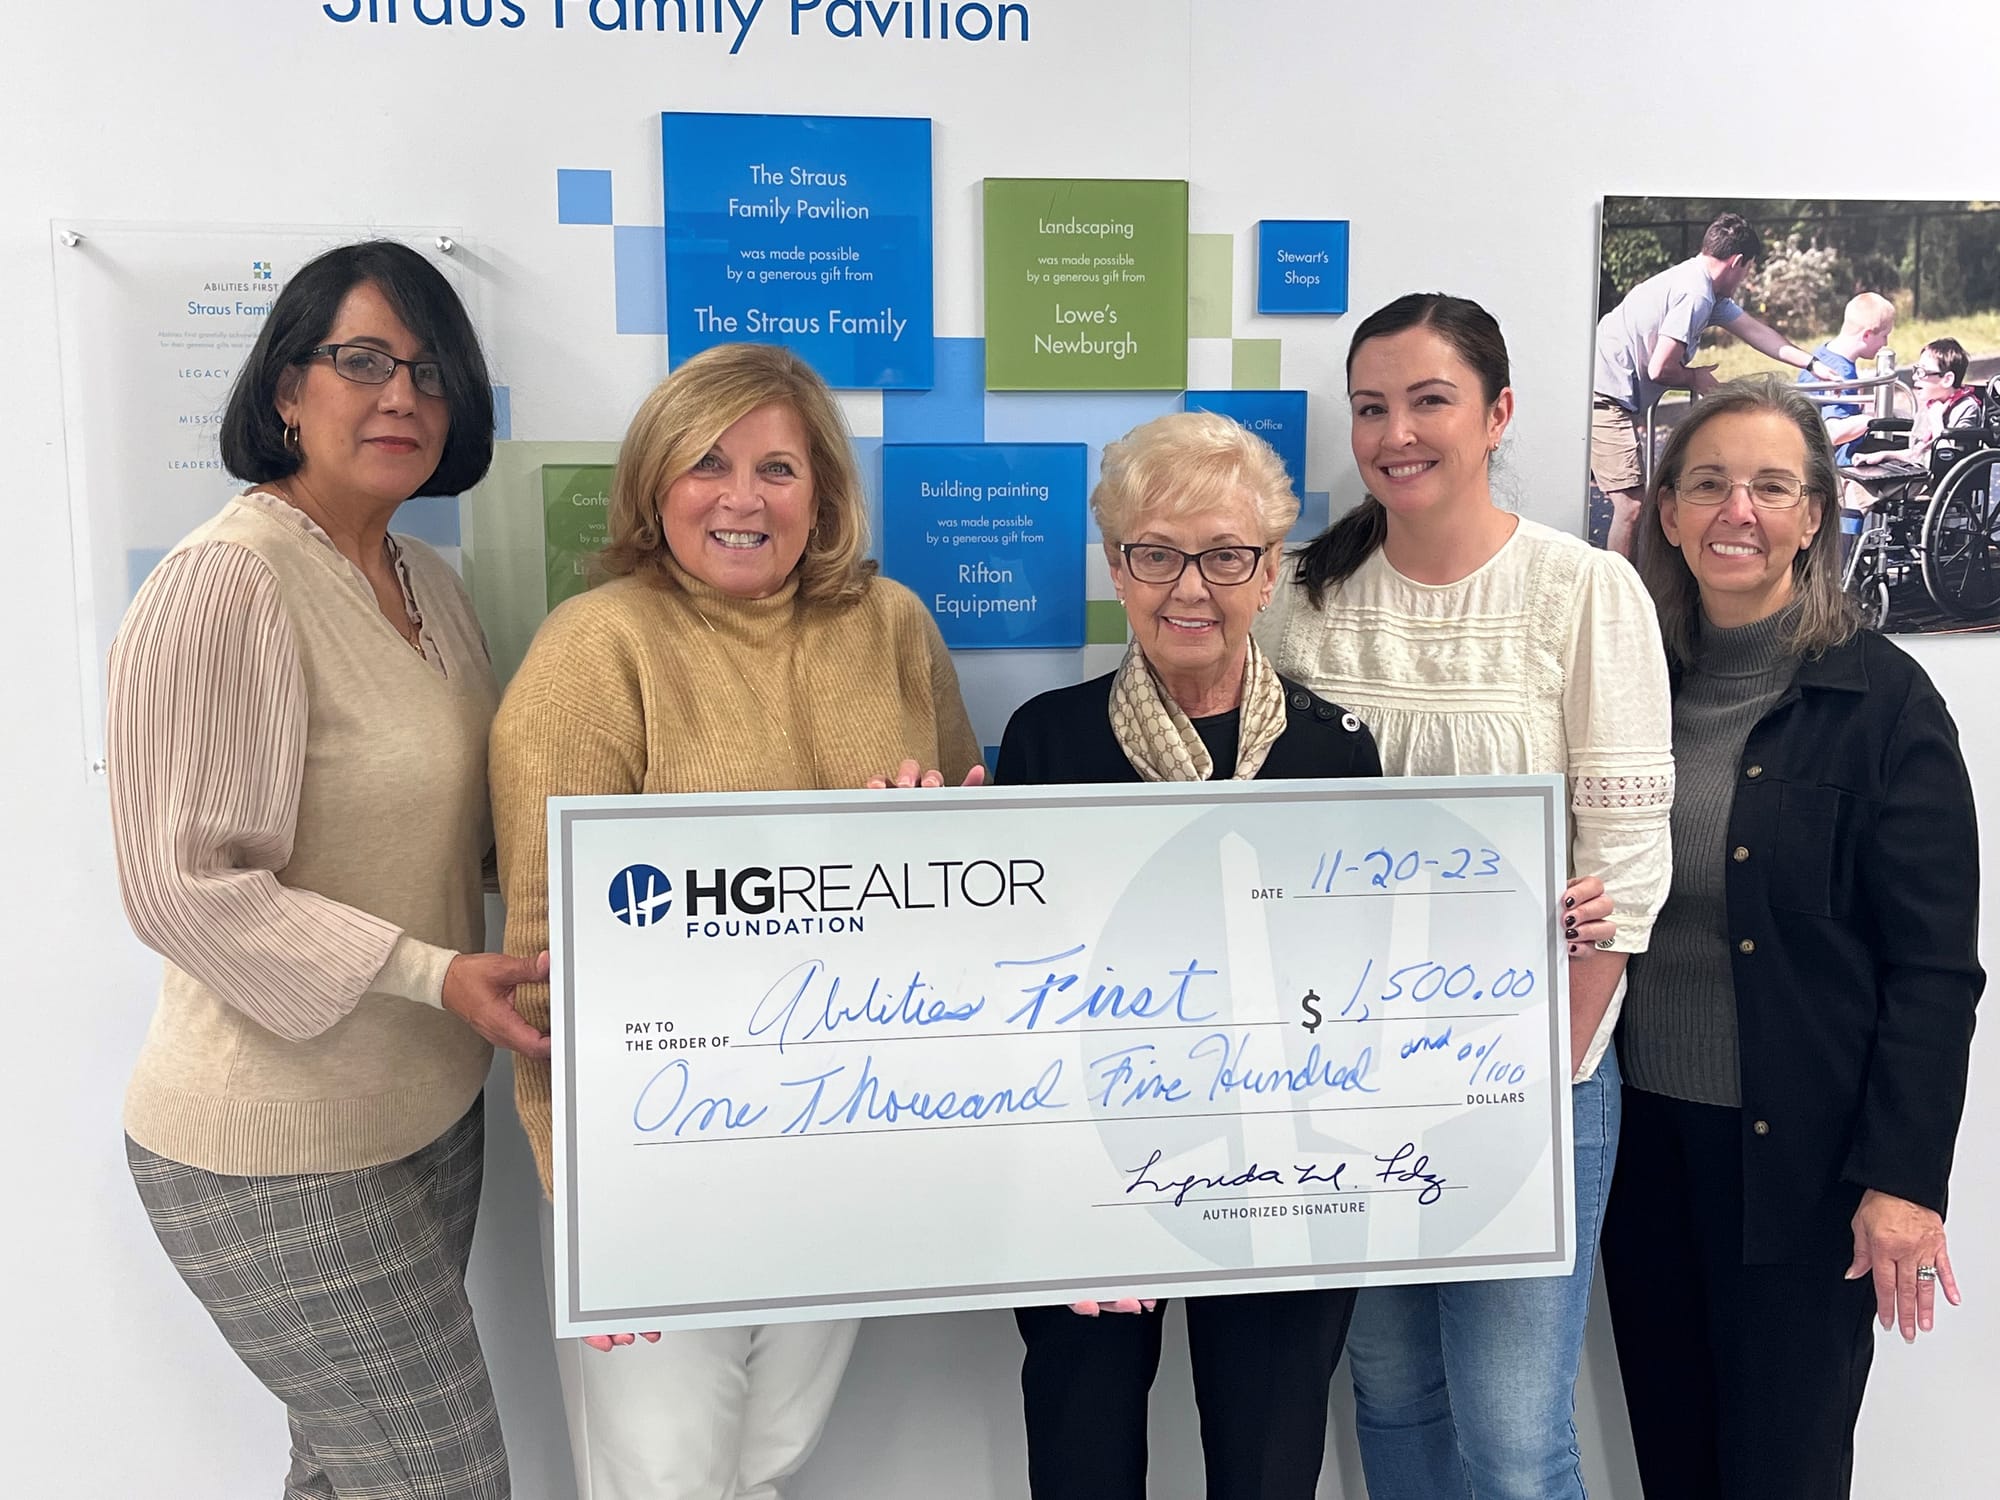 From left, Denisse DeLeon-Freytes, HG Realtor Foundation; Joann Parker, Abilities First in Cornwall; Maryann Tercasio, HG Realtor Foundation; Eria Mills, Abilities First and Carole McCann, HGAR Board of Directors member